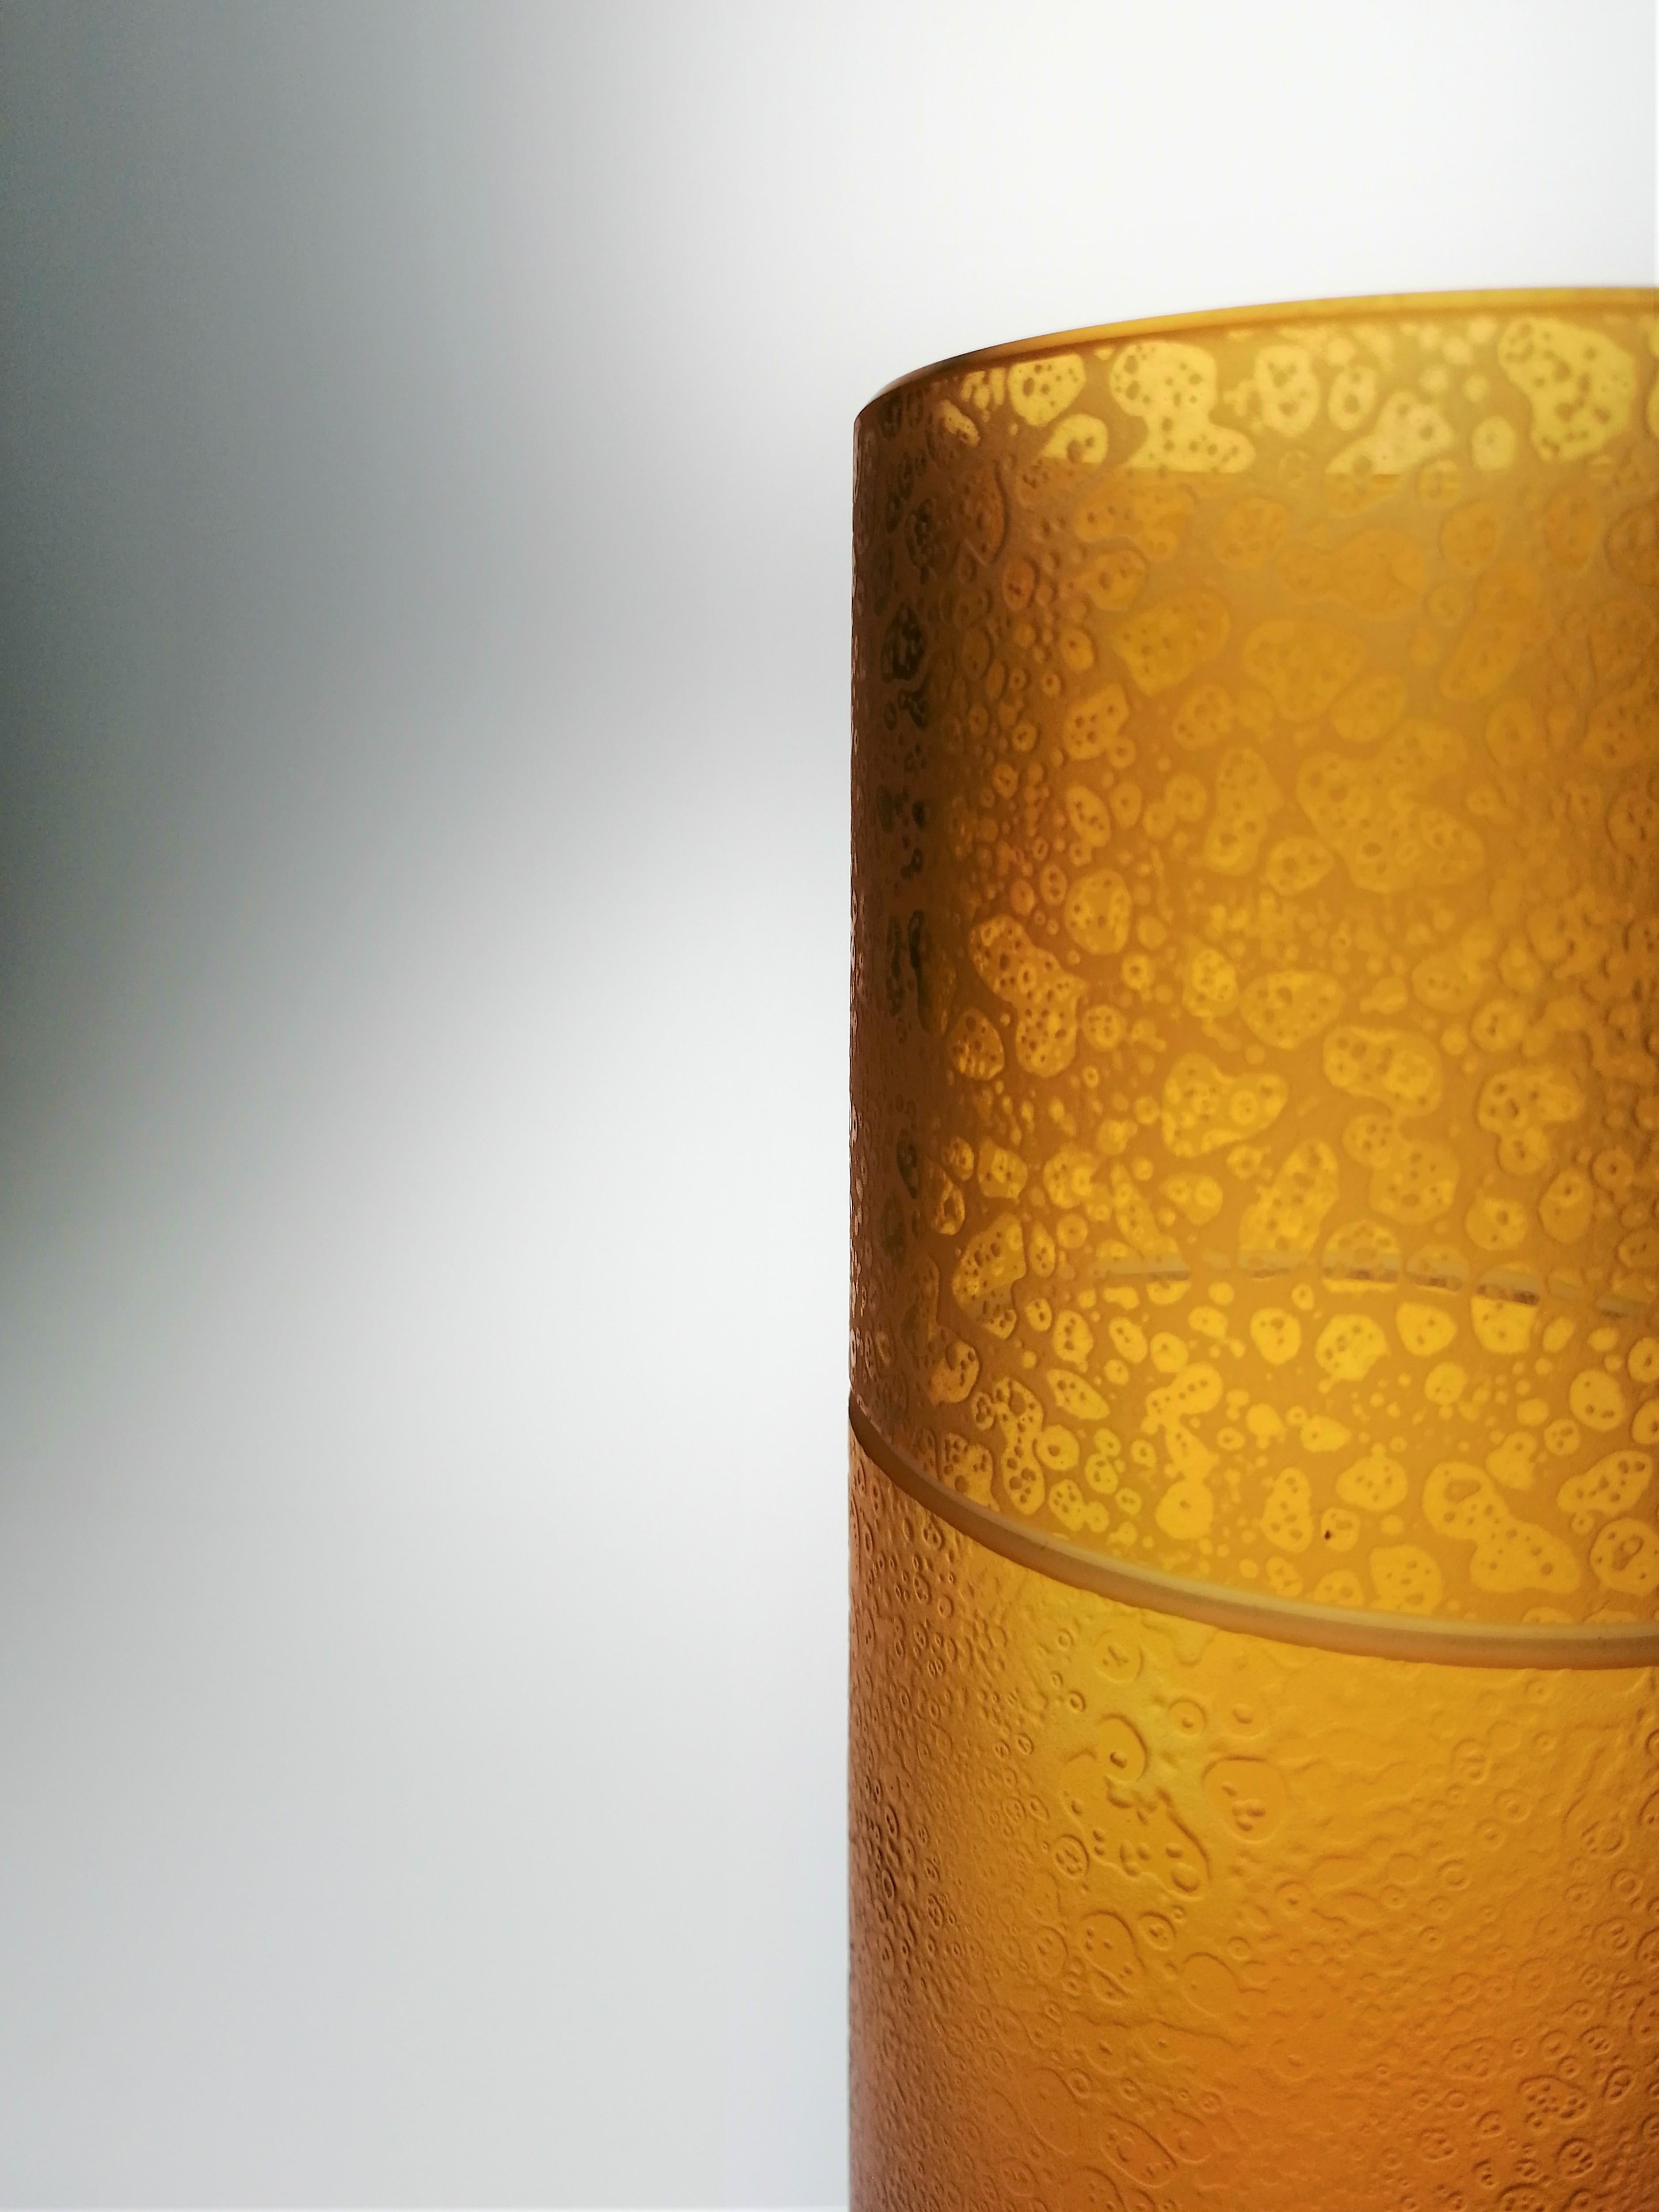 Amber crystal vase tube with leather effect

One of the latest novelties of Cristallerie de Montbronn, this Crystal tube vase will give a new energy to any type of interior.

This vase has a unique leather effect created using an ambitious